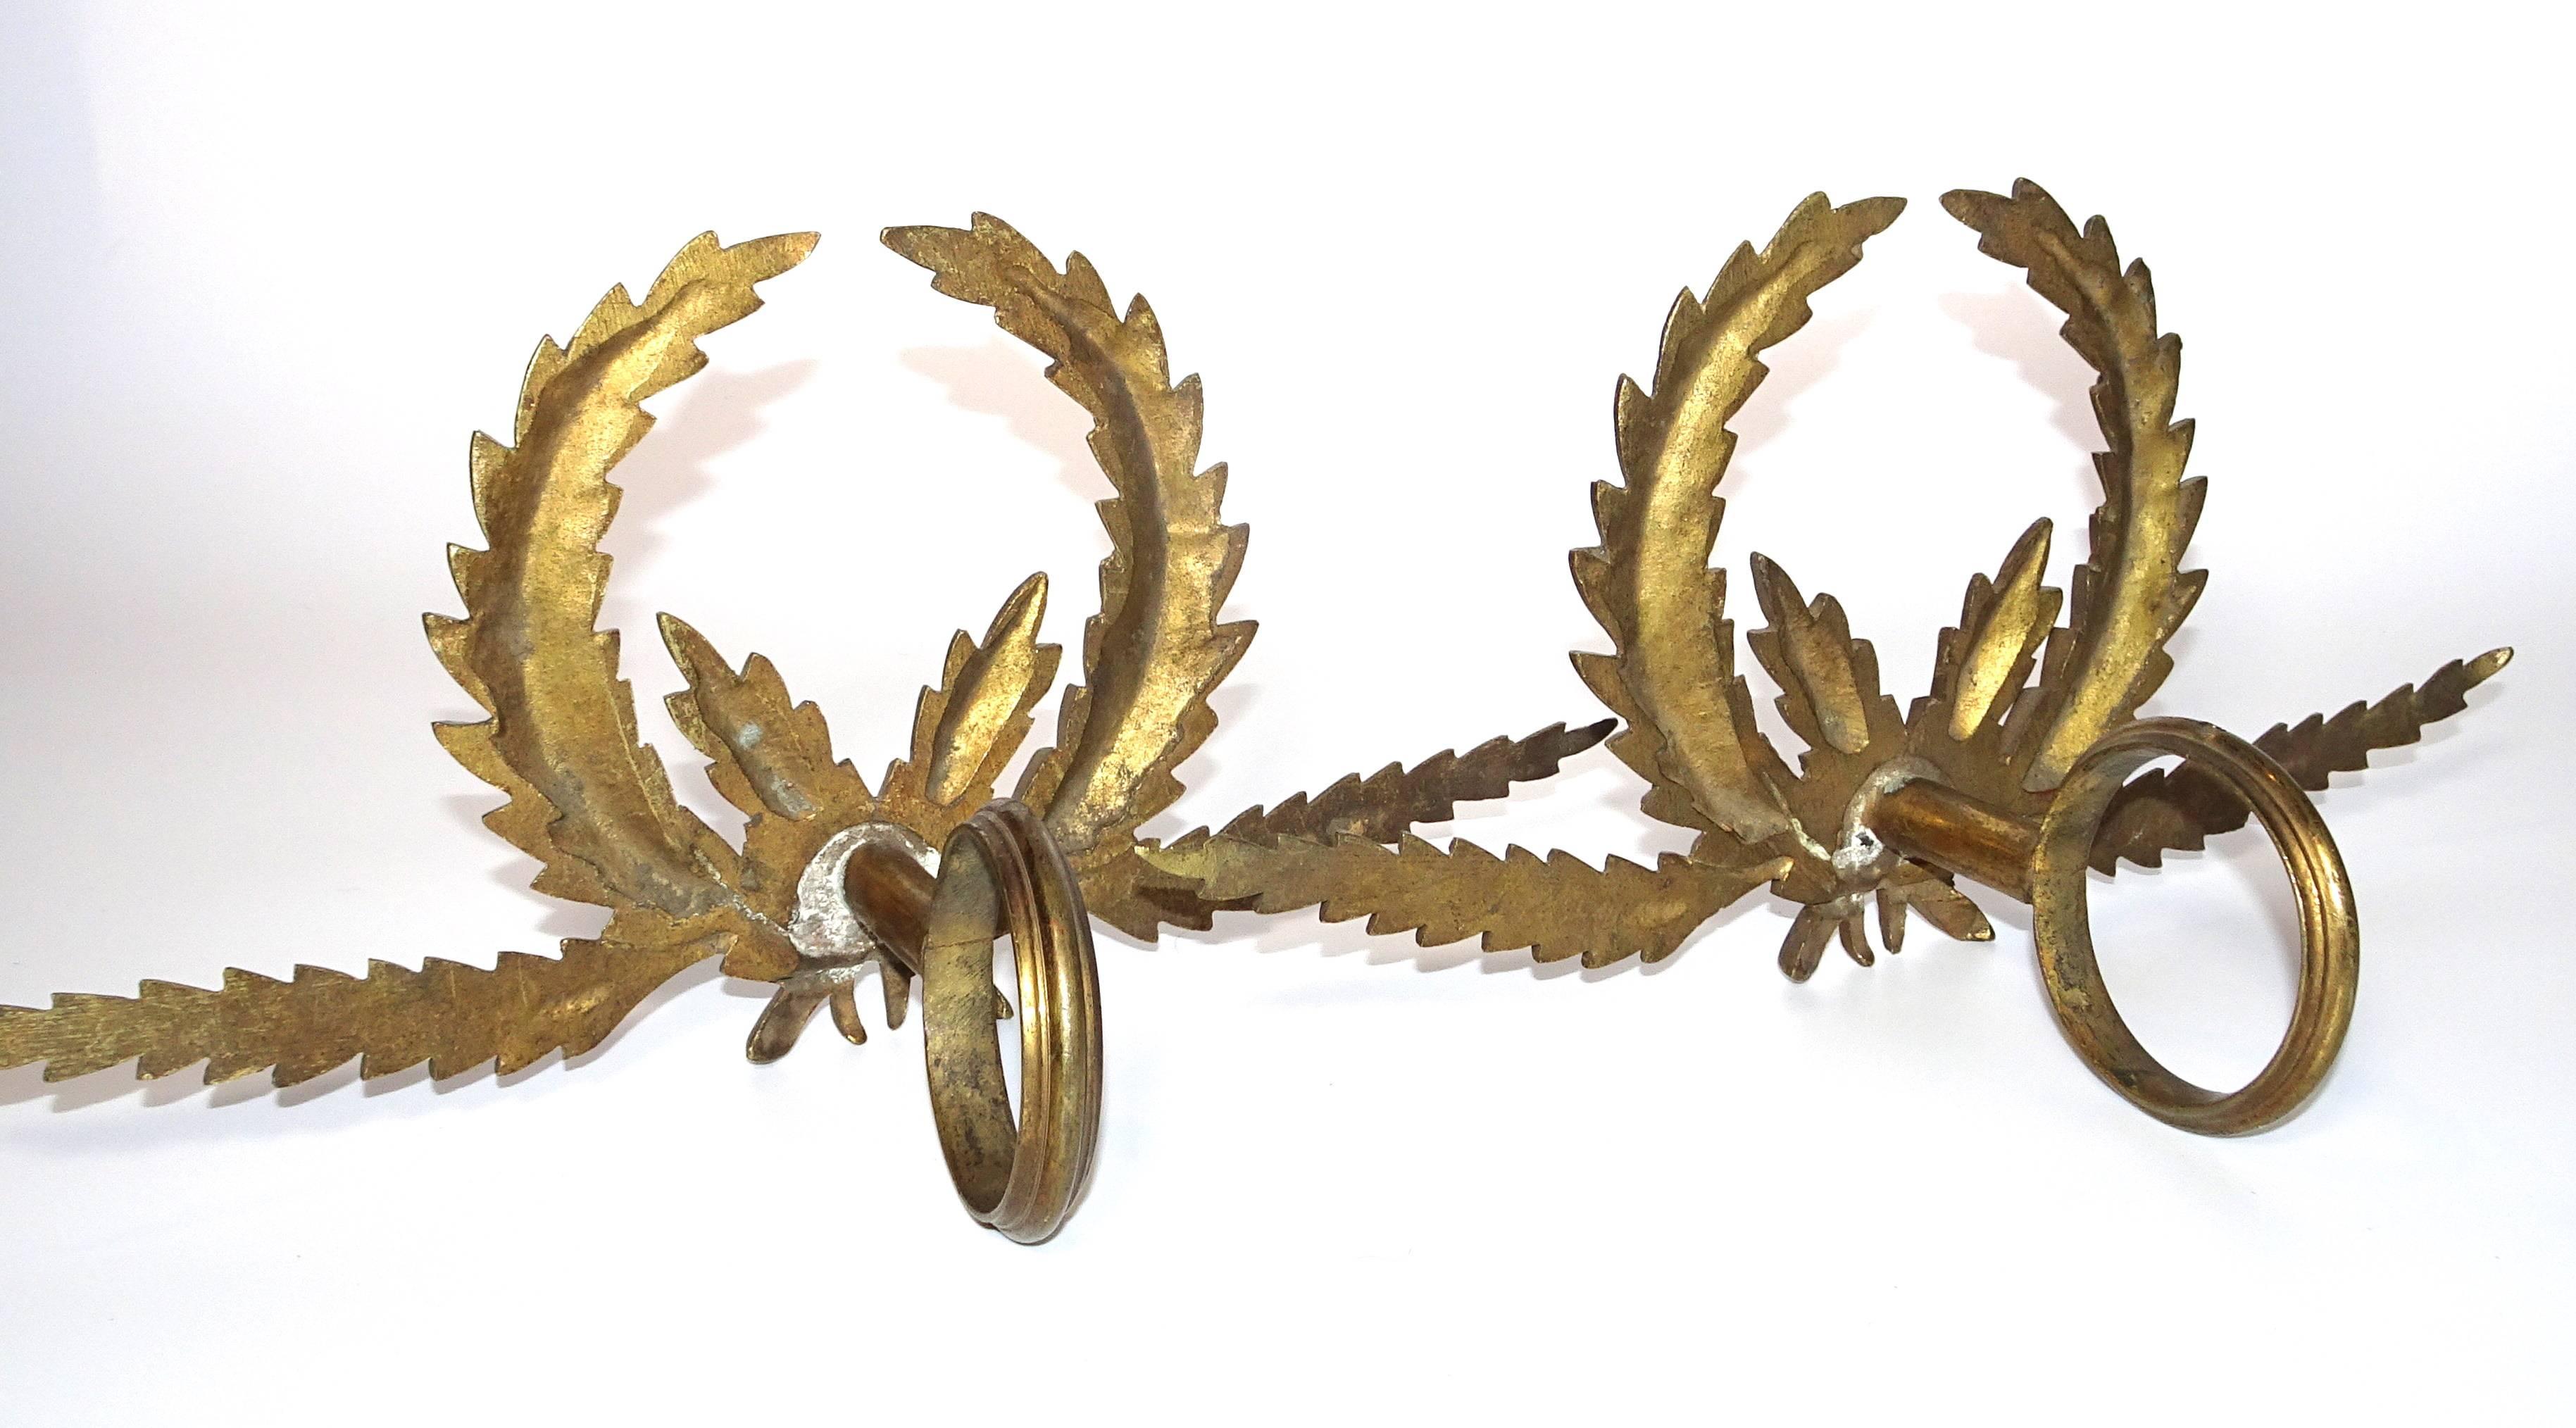 Antique French brass drapery rod holders with garland design.